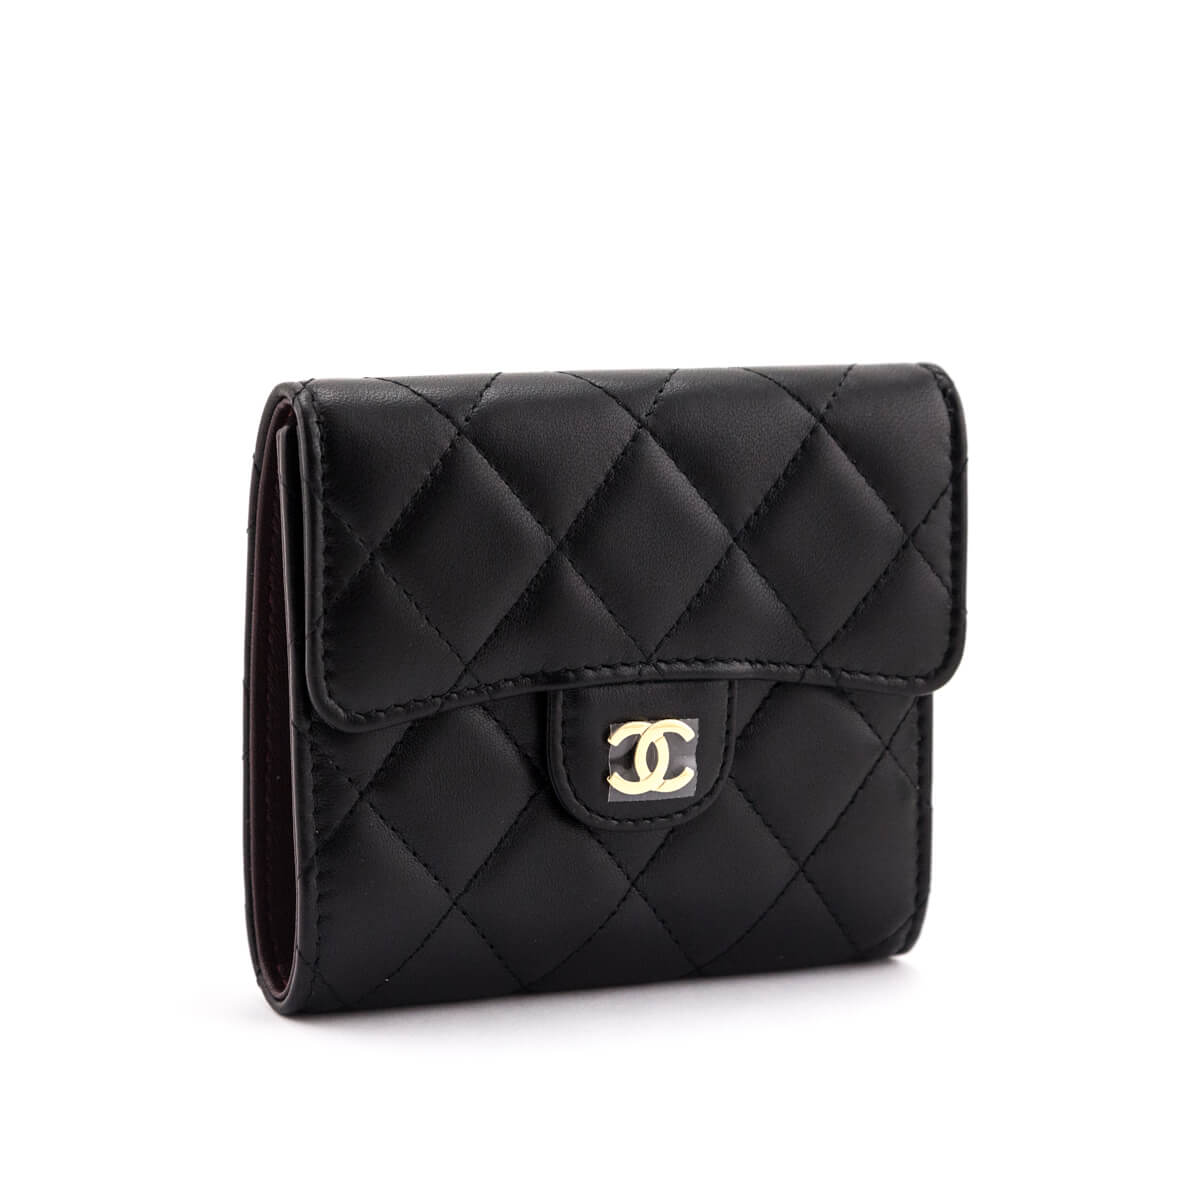 Chanel Black Lambskin Classic Small Flap Wallet - Love that Bag etc - Preowned Authentic Designer Handbags & Preloved Fashions